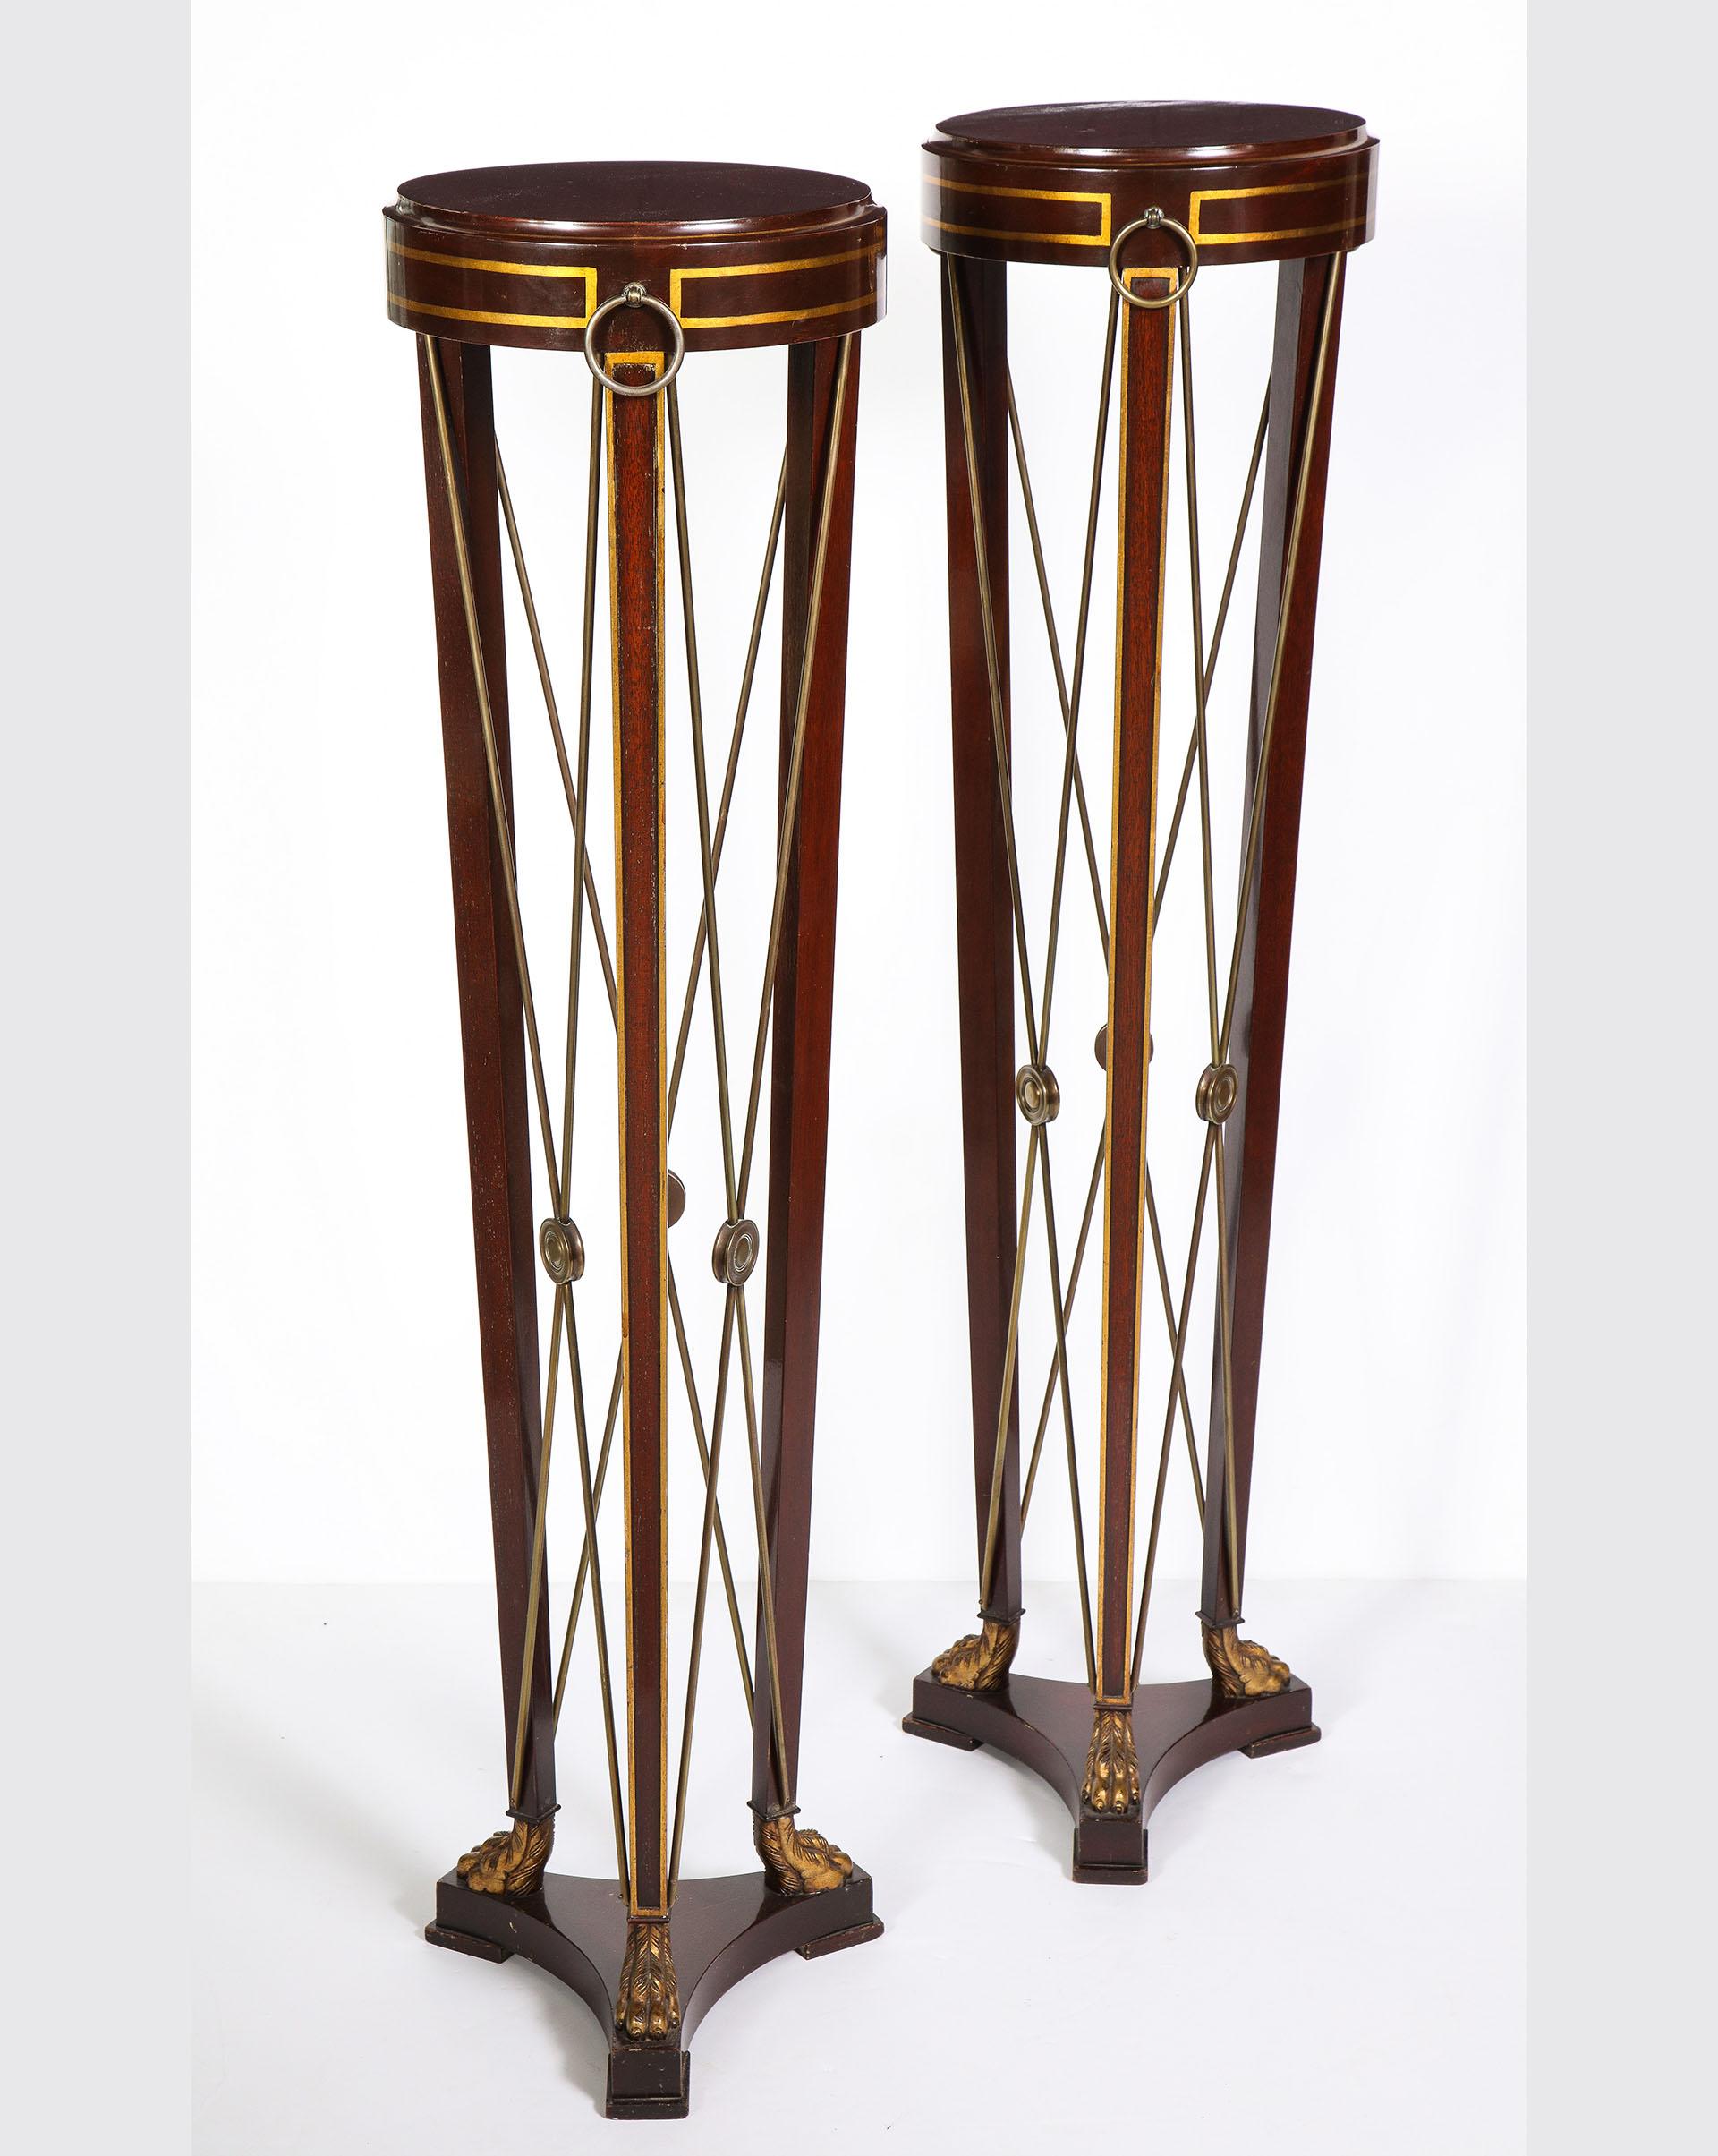 Each mahogany pedestal with pencil line gilded detailing and a brass cross support with gilded claw feet on a triparte base.